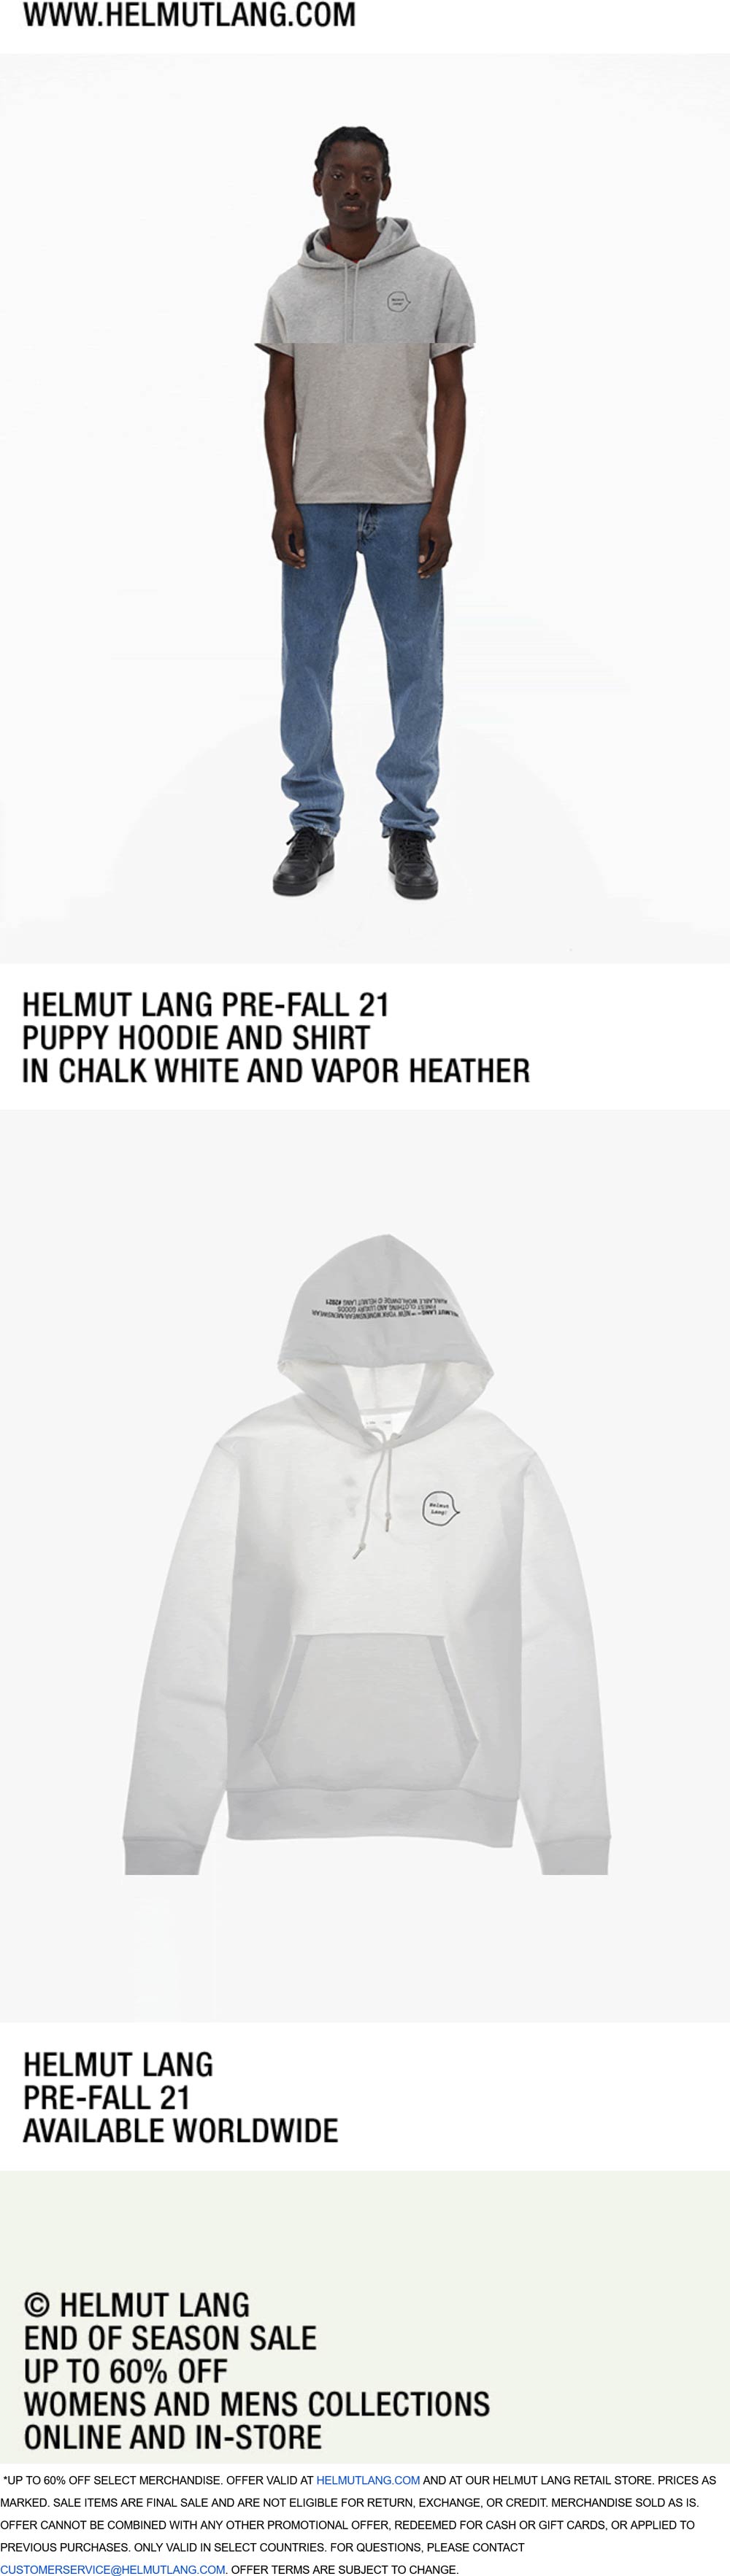 Helmut Lang stores Coupon  60% off past season styles at Helmut Lang, ditto online #helmutlang 